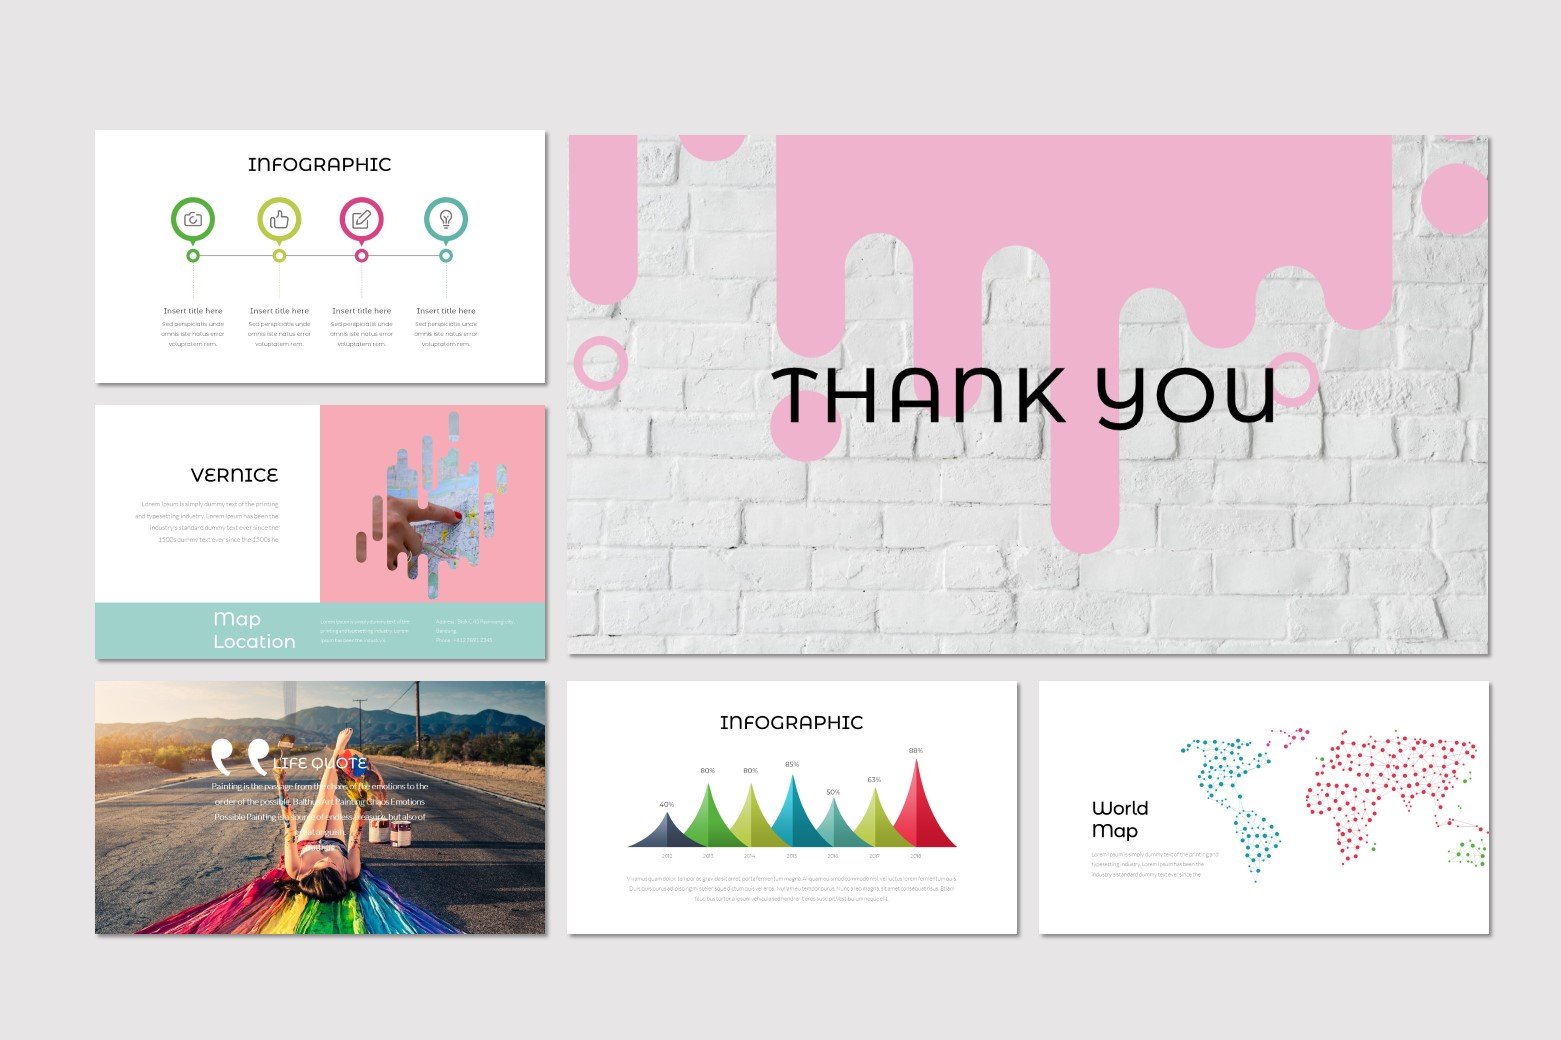 The template includes beautiful and colorful infographics.